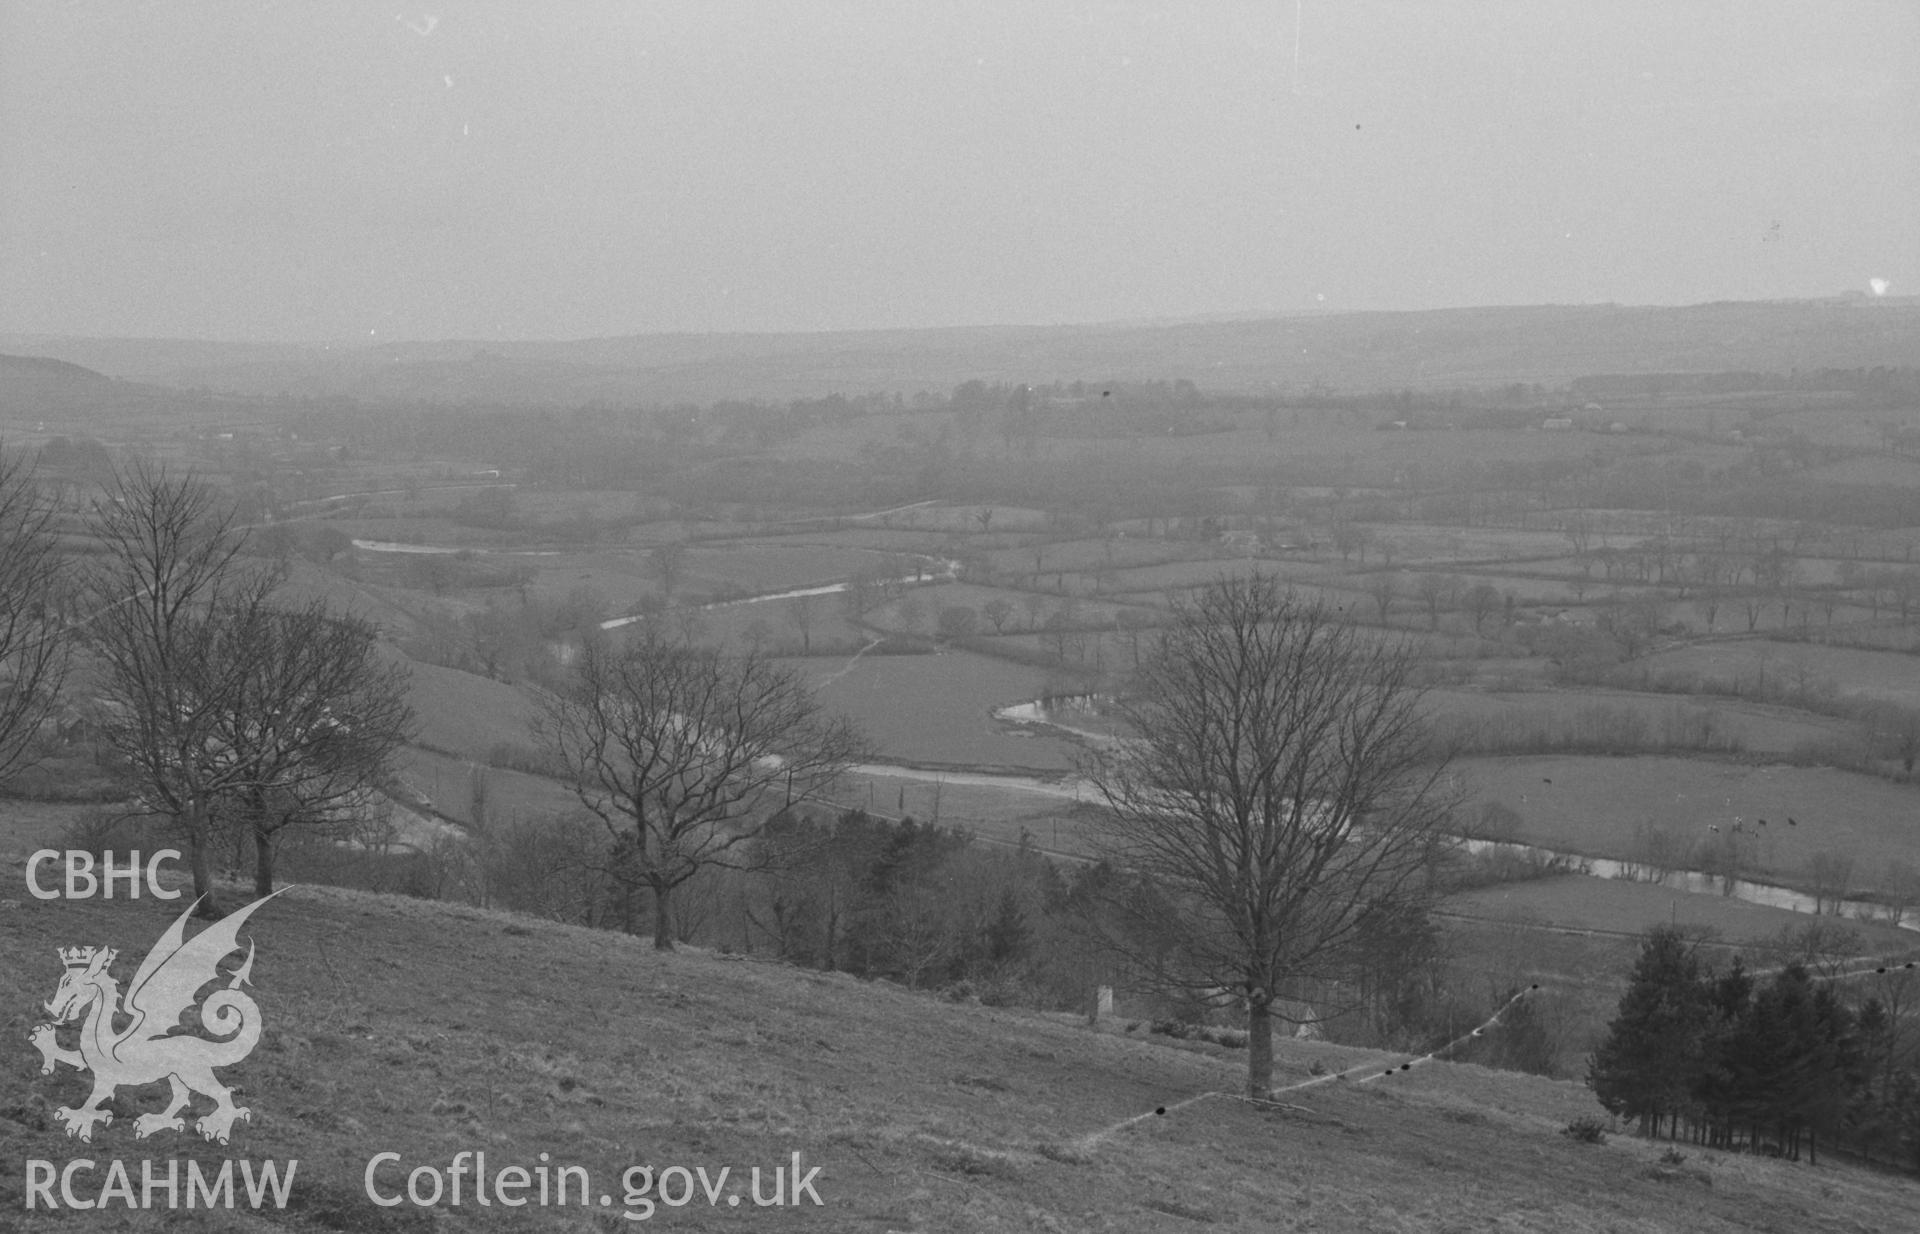 Digital copy of a black and white negative showing view looking from the top of Pen-y-Gaer across the Teifi to Highmead near Llanybyther. Photographed by Arthur O. Chater in April 1967 looking west from Grid Reference SN 523 434.